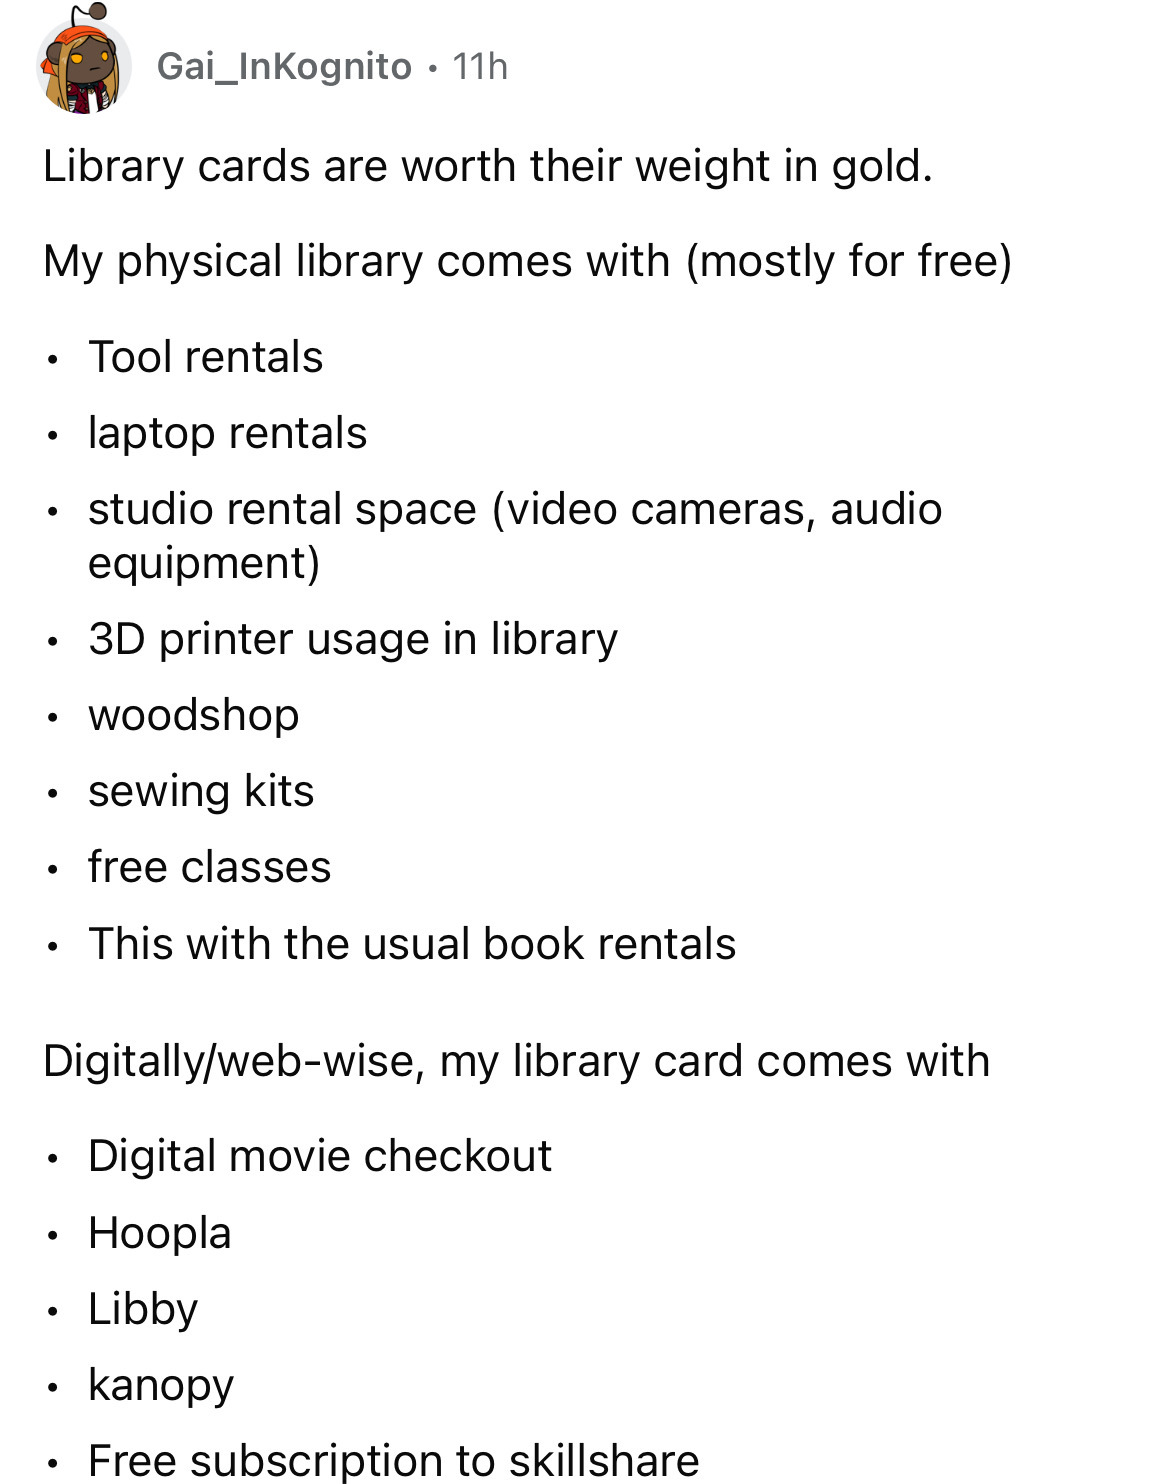 angle - Gai_Inkognito . 11h Library cards are worth their weight in gold. My physical library comes with mostly for free Tool rentals laptop rentals studio rental space video cameras, audio equipment 3D printer usage in library woodshop sewing kits free c